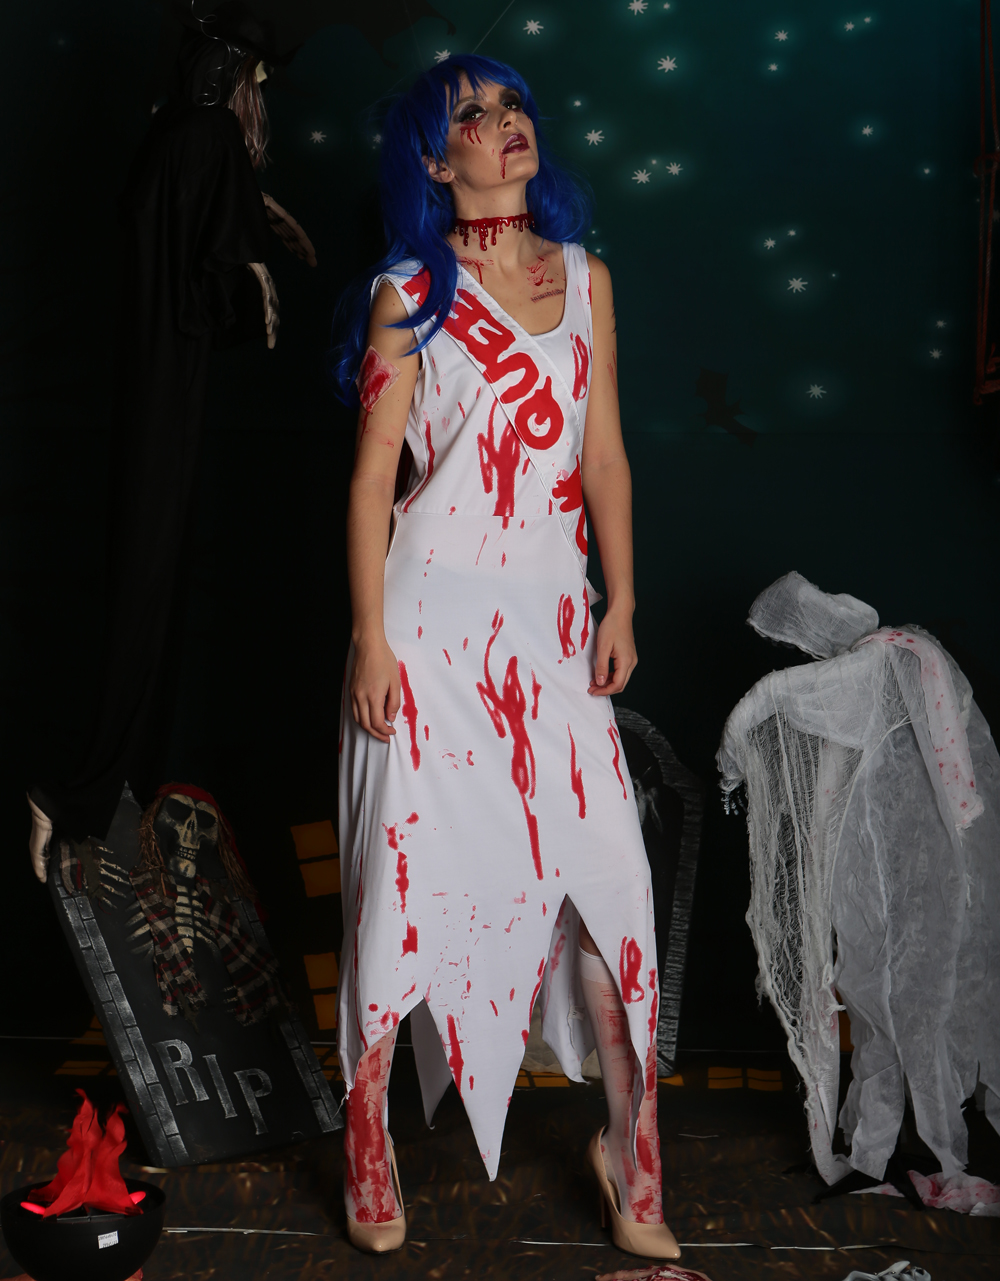 F1709 zombie Queen of Miss World costume,it comes with dress,shoulder belt